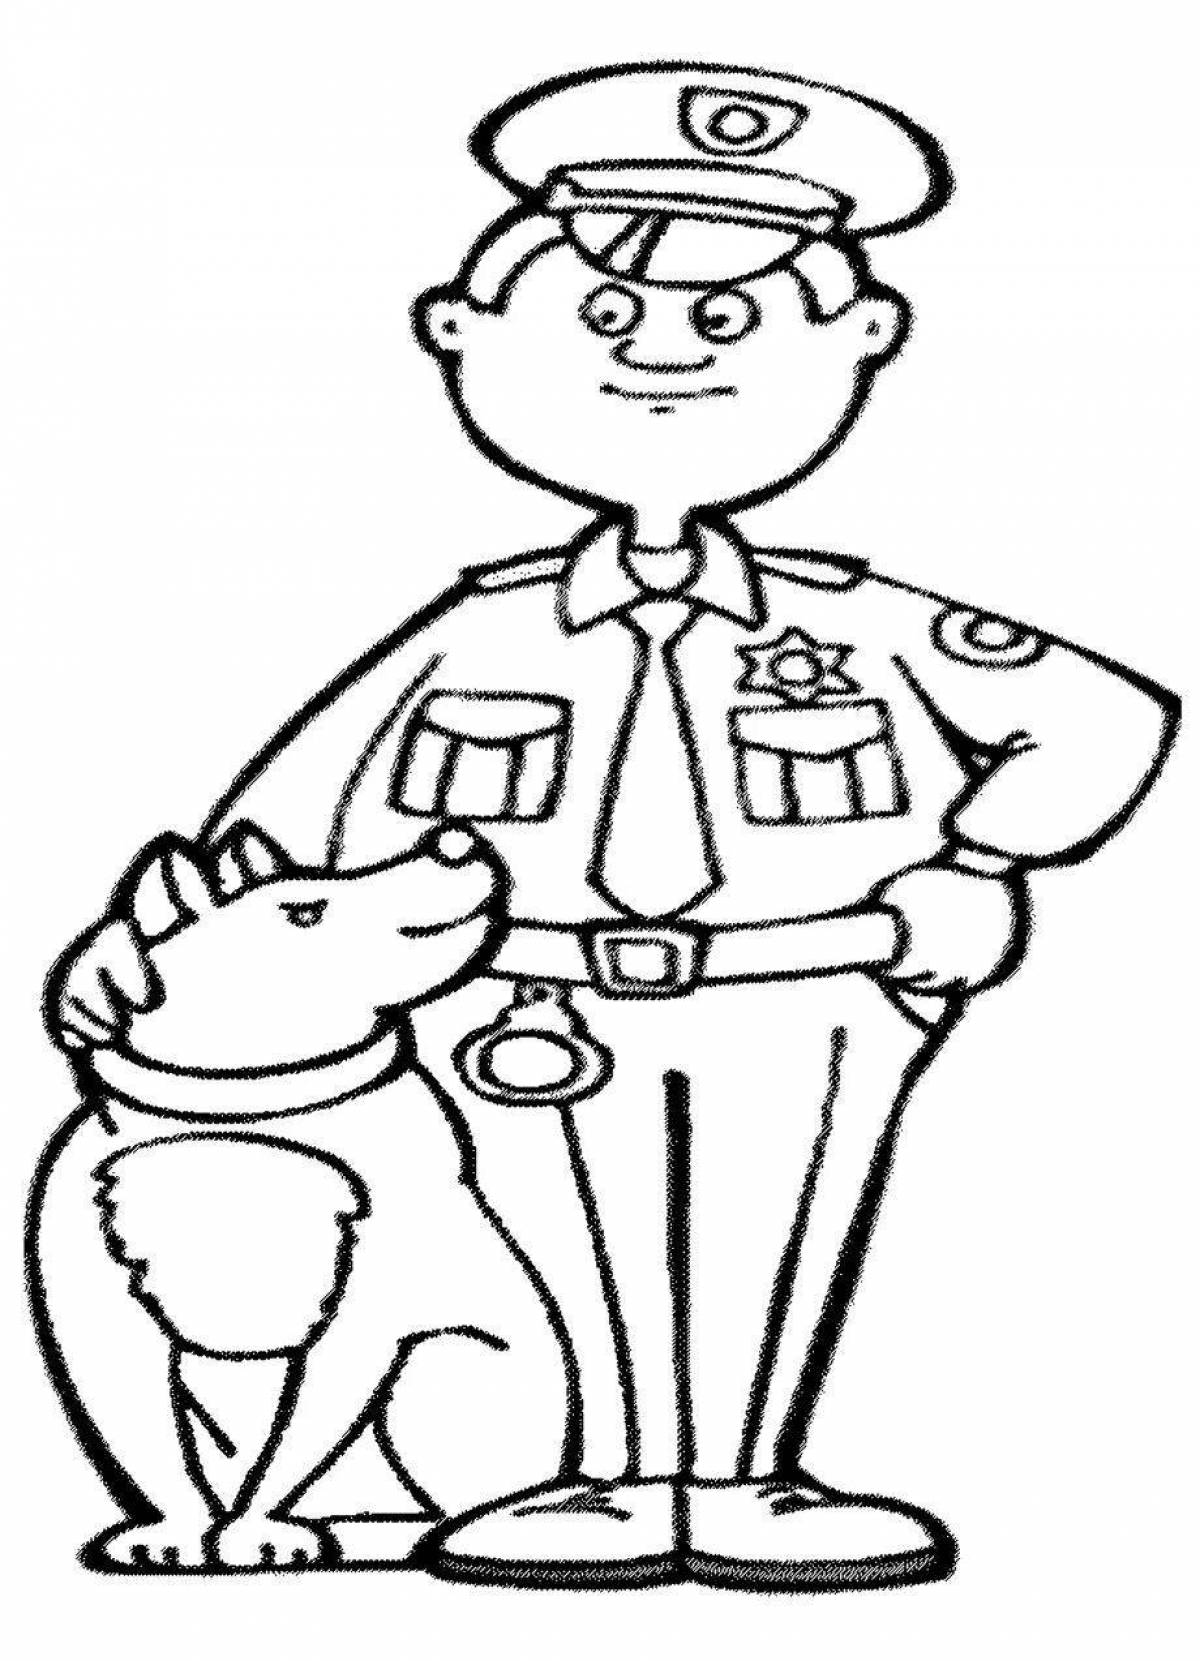 Charming police coloring book